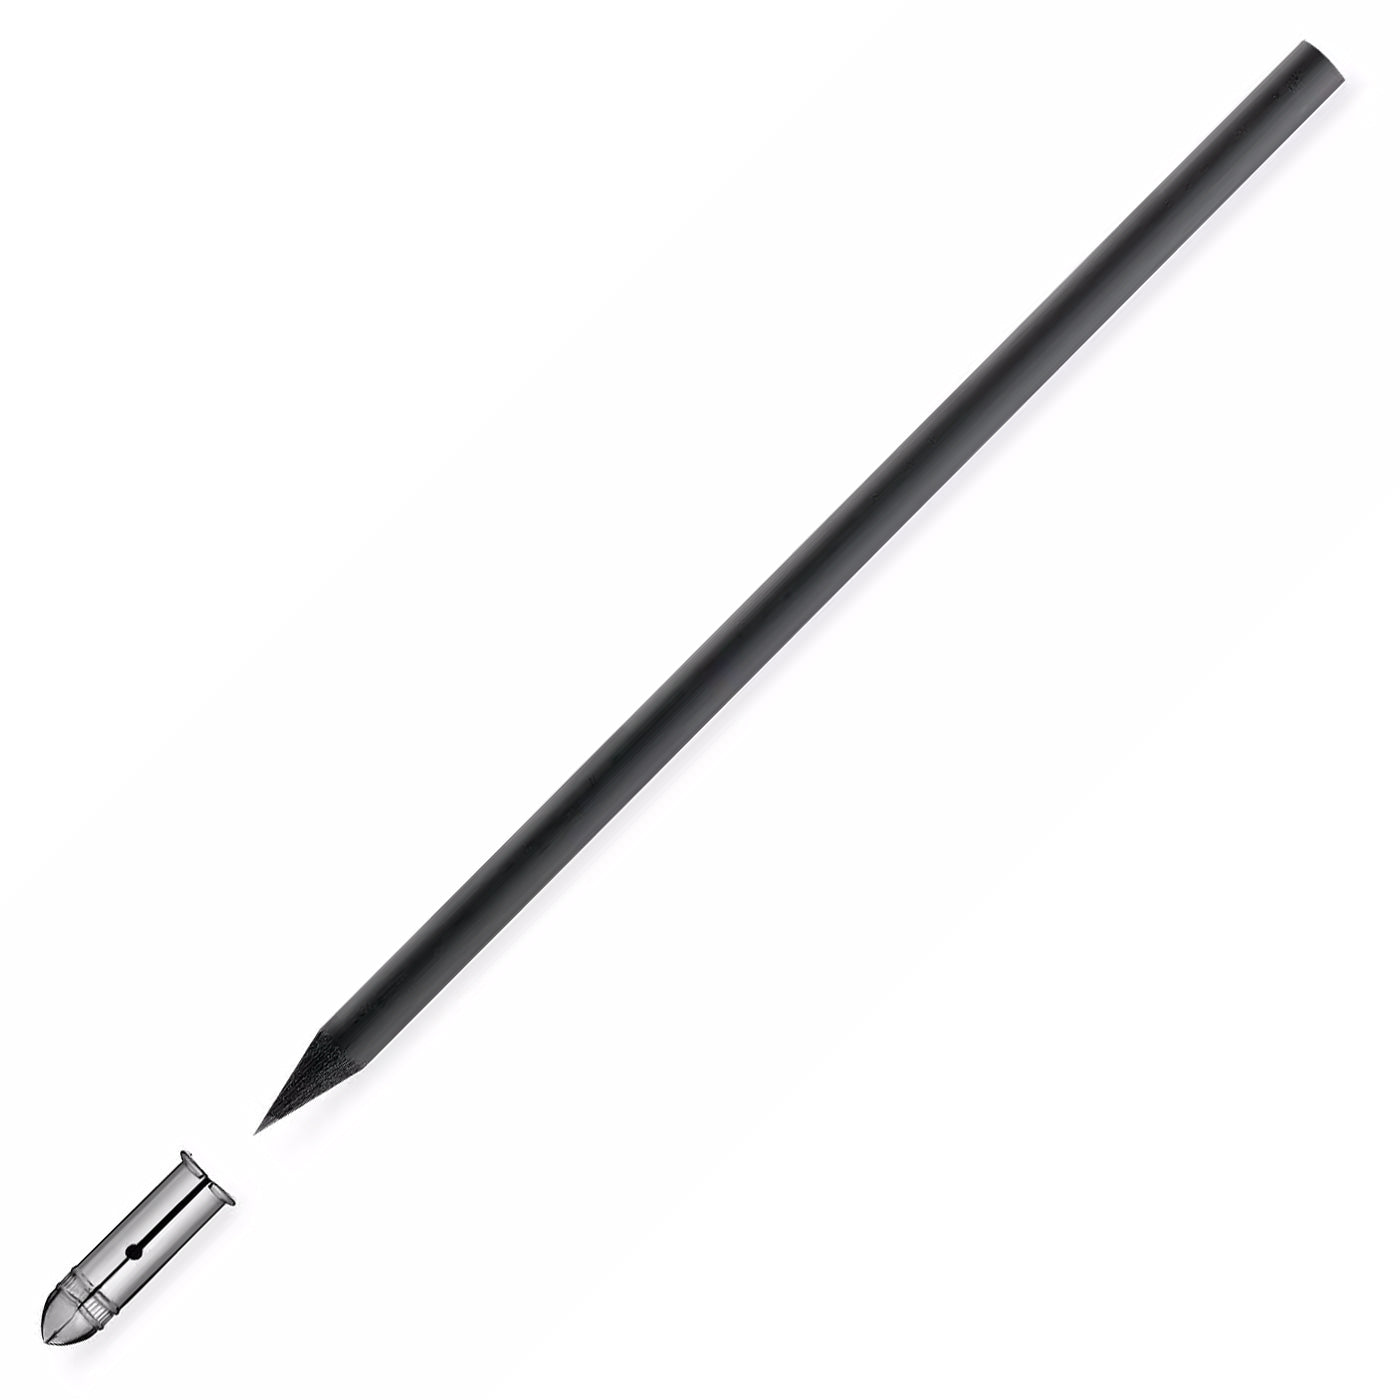 e+m Holzprodukte Pencil Cap - Nickel - Lead Protector Made in Germany with pencil uncapped